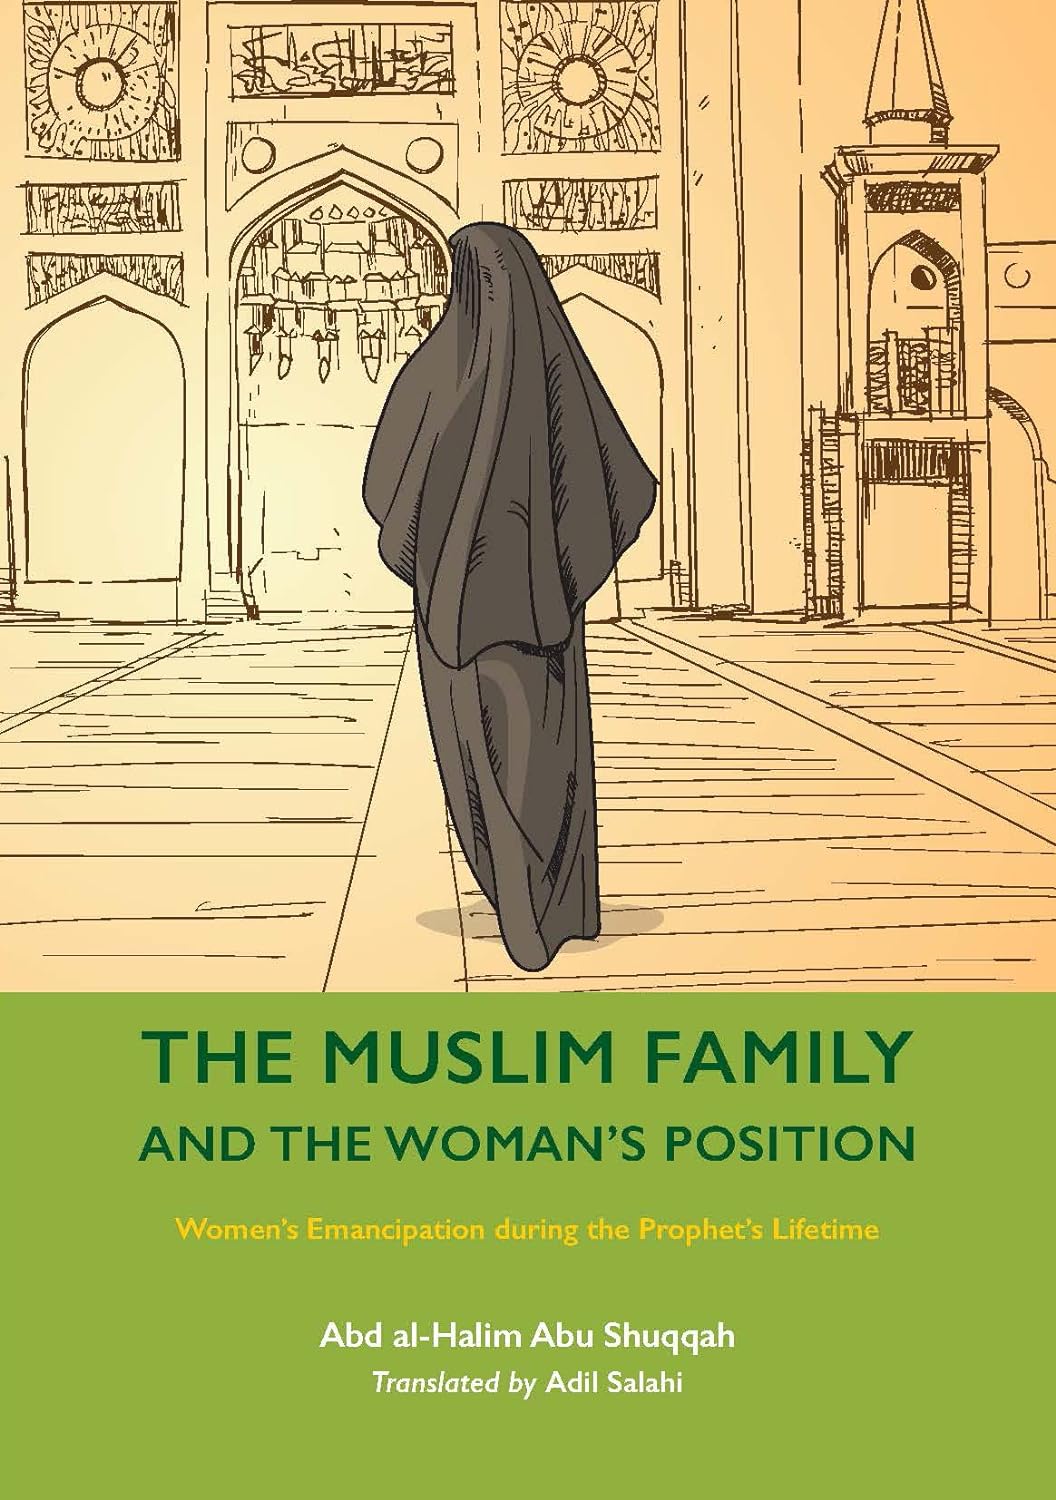 The Muslim Family and the Woman’s Position: Women’s Emancipation During the Prophet’s Lifetime | Volume 7/8